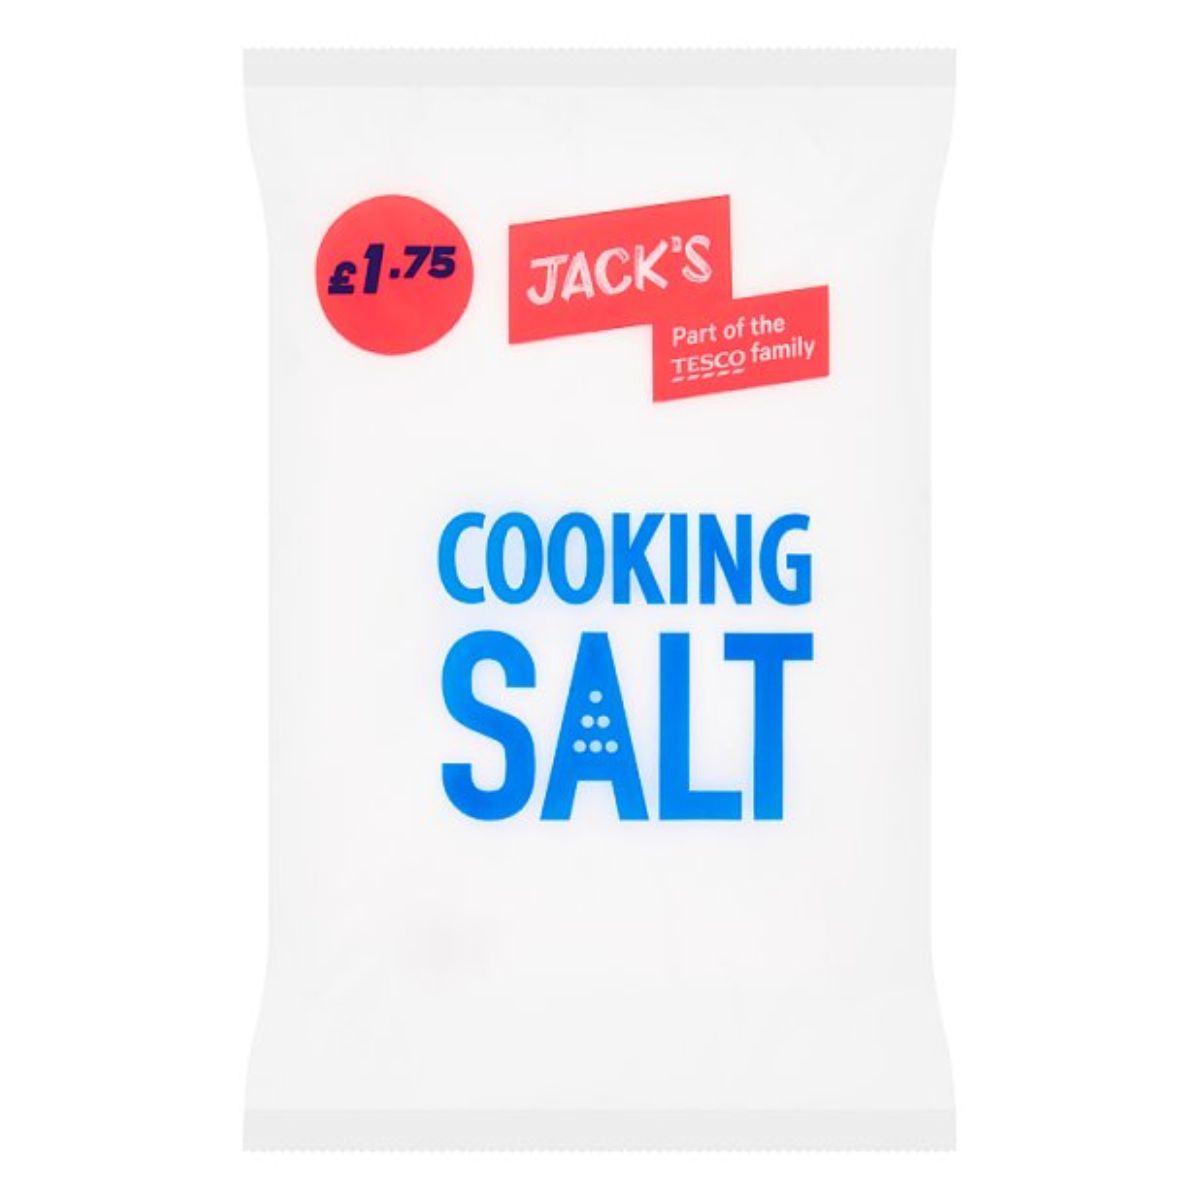 A package of Jacks - Cooking Salt - 1.5kg priced at £1.75, part of the Tesco family of products.